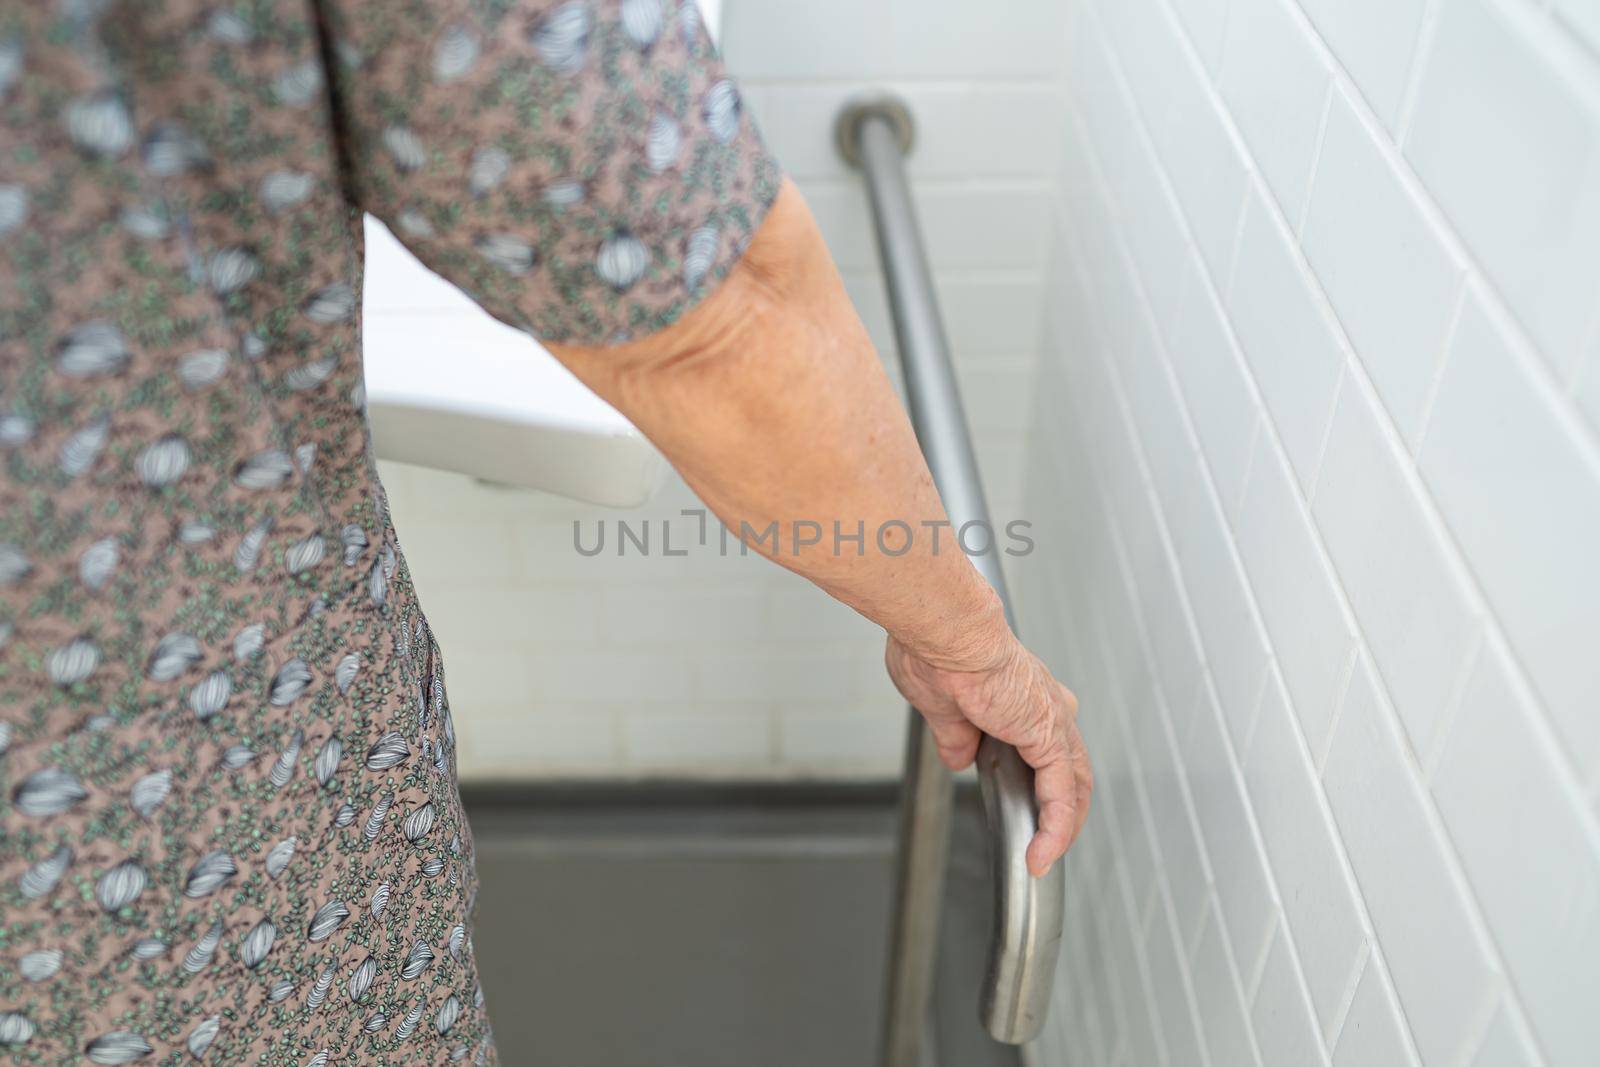 Asian senior or elderly old lady woman patient use toilet bathroom handle security in nursing hospital ward : healthy strong medical concept. by pamai